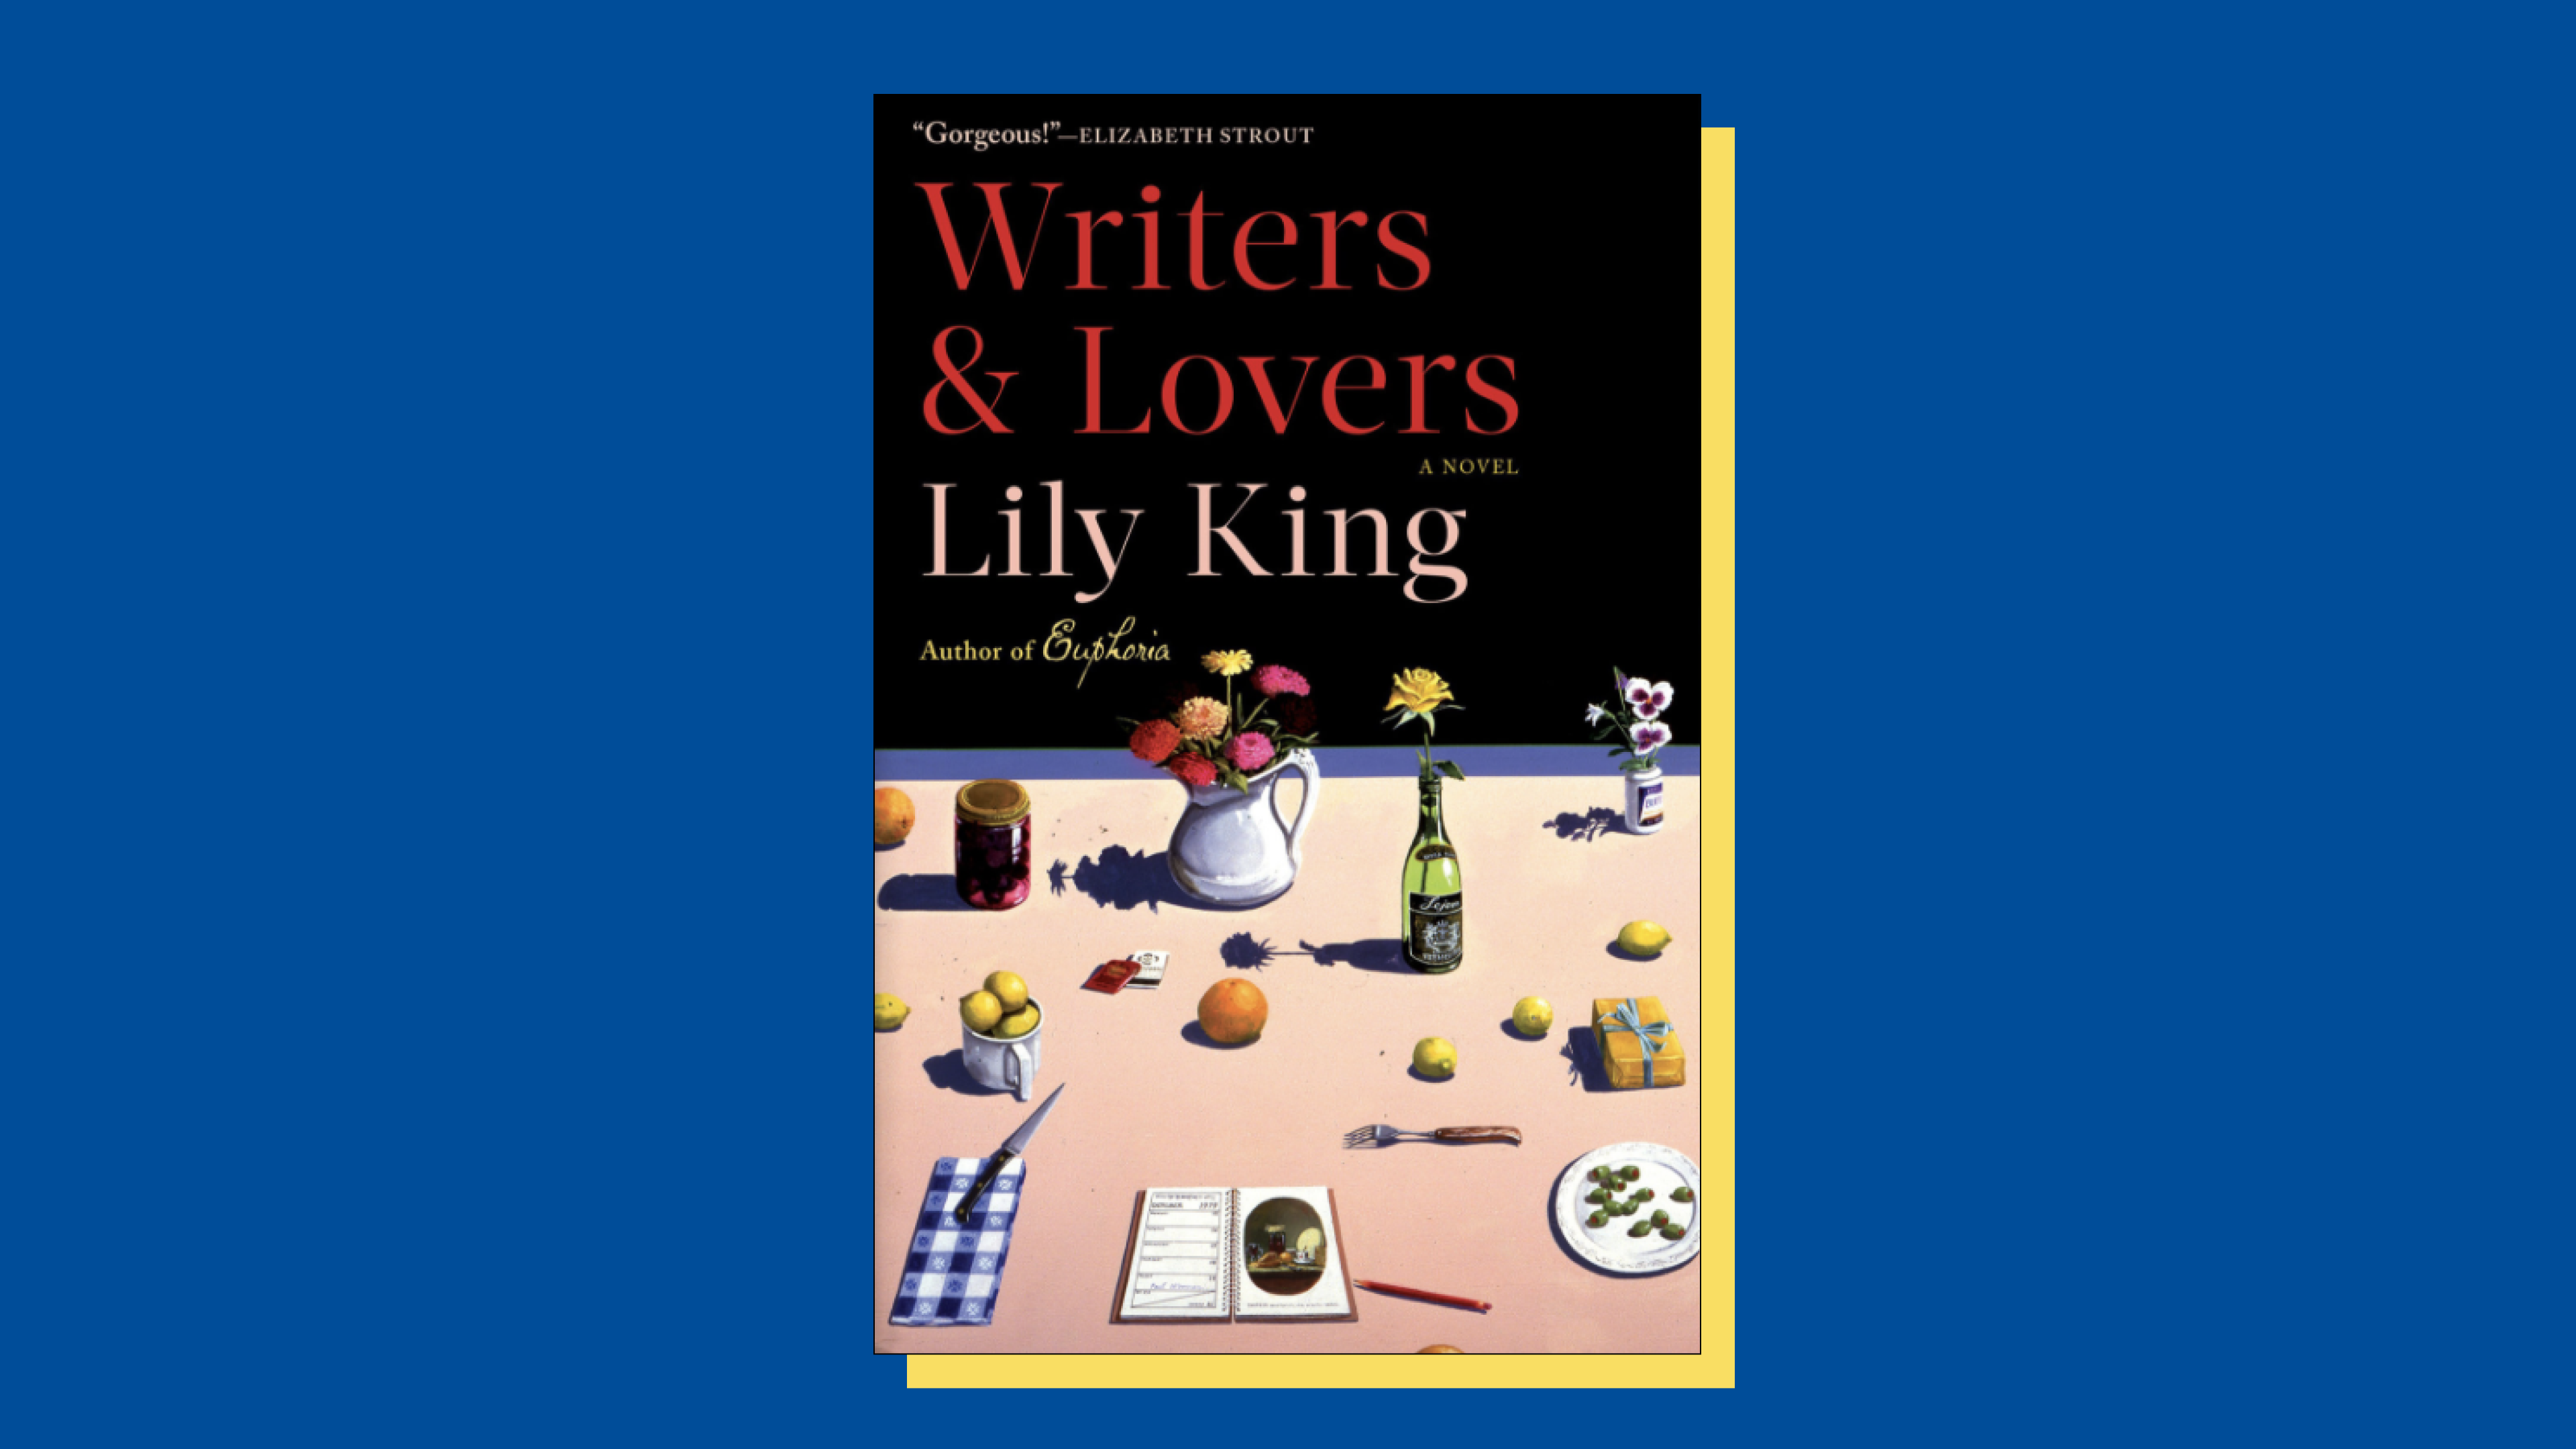 “Writers & Lovers” by Lily King